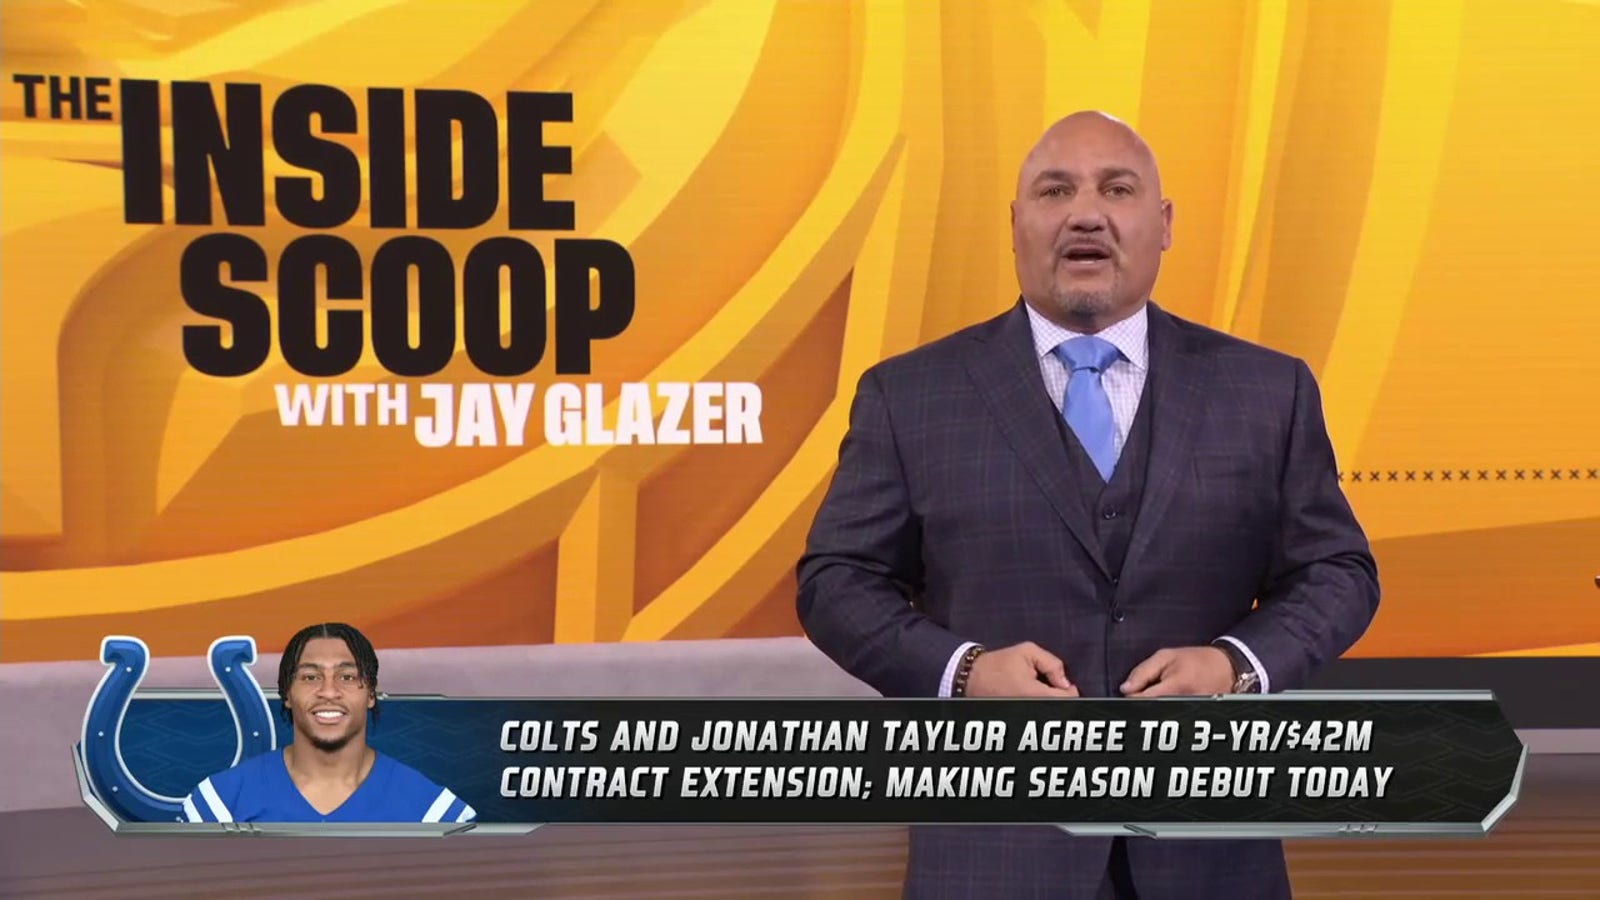 Jay Glazer on Jonathan Taylor's new deal with Colts